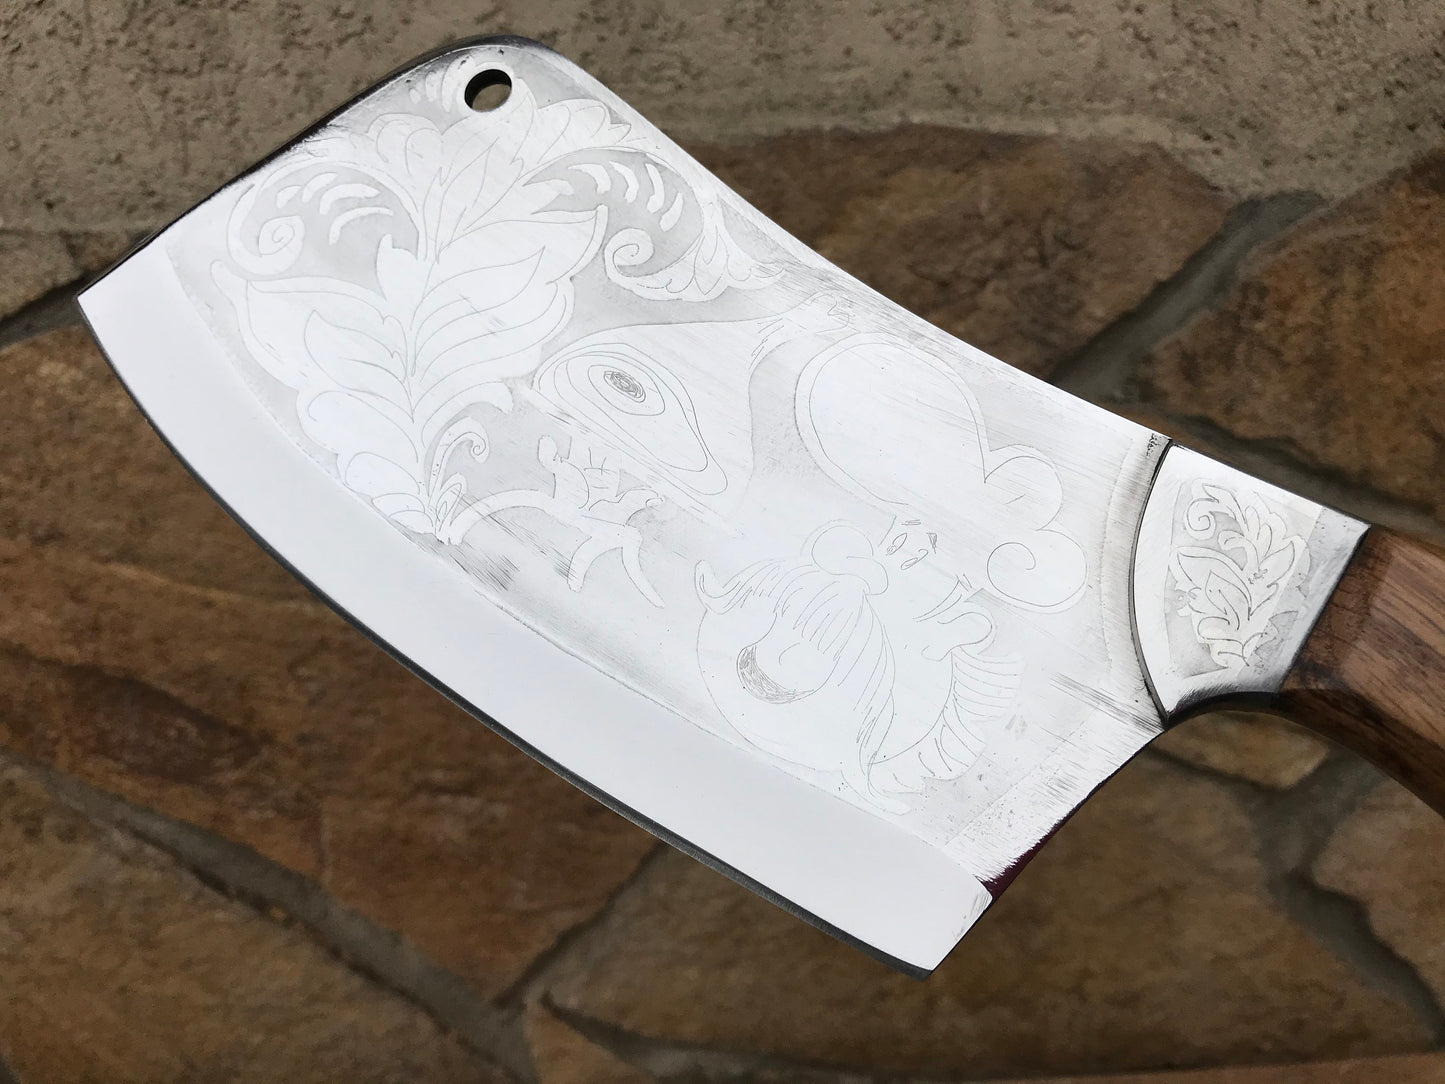 Stainless steel butcher knife, engraved knife, meat knife, meat cleaver, chef knife, kitchen knife, cook knife, chef gifts, meat chopper